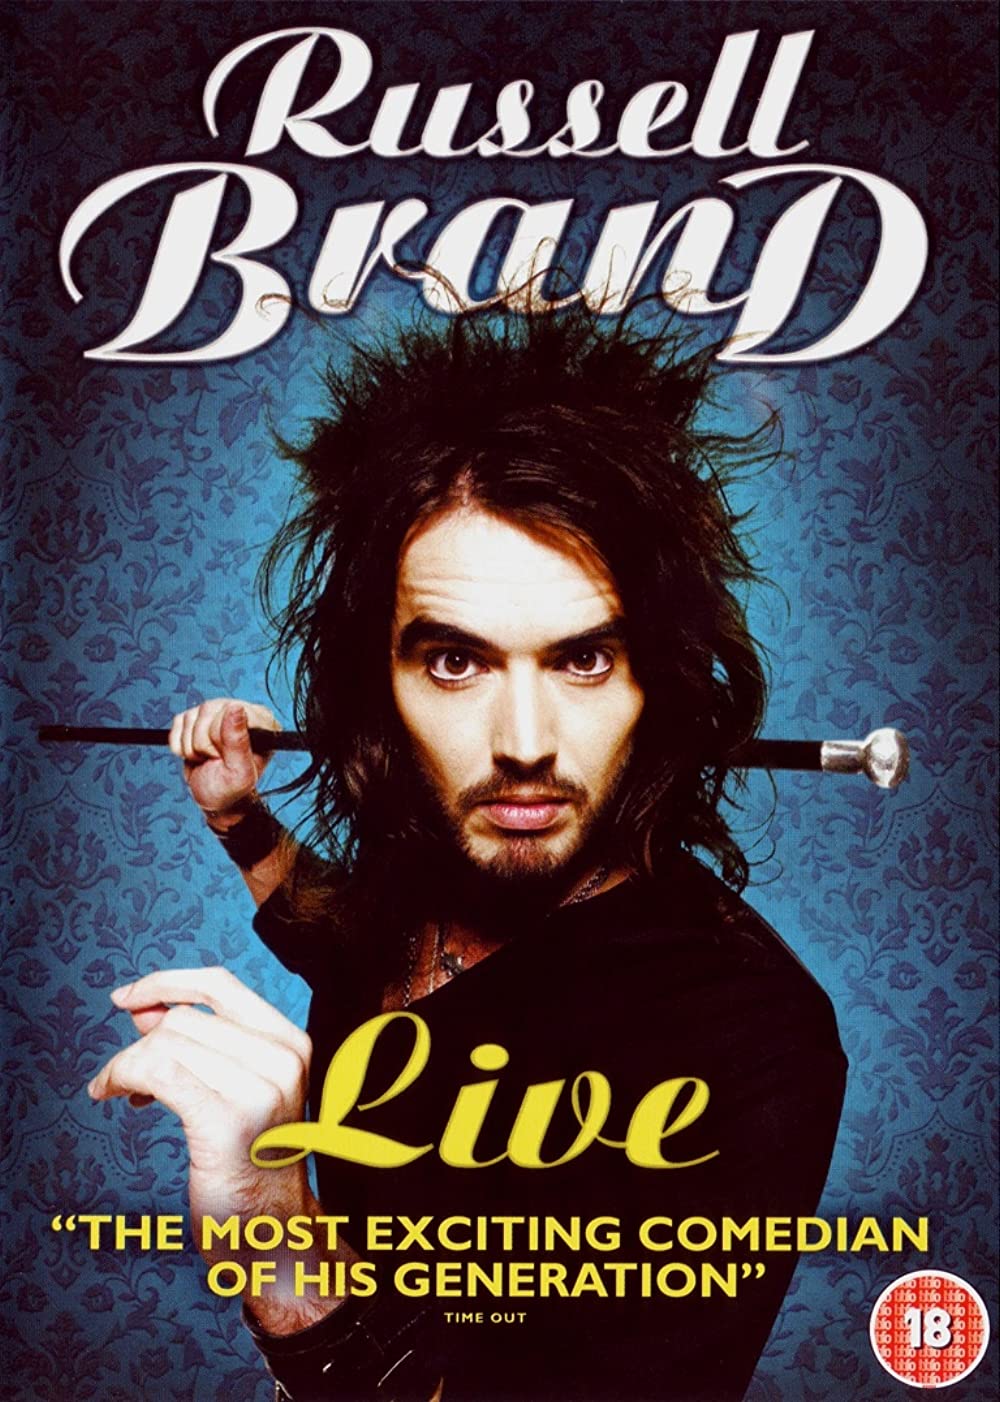 Download Russell Brand: Live Movie | Russell Brand: Live Dvd